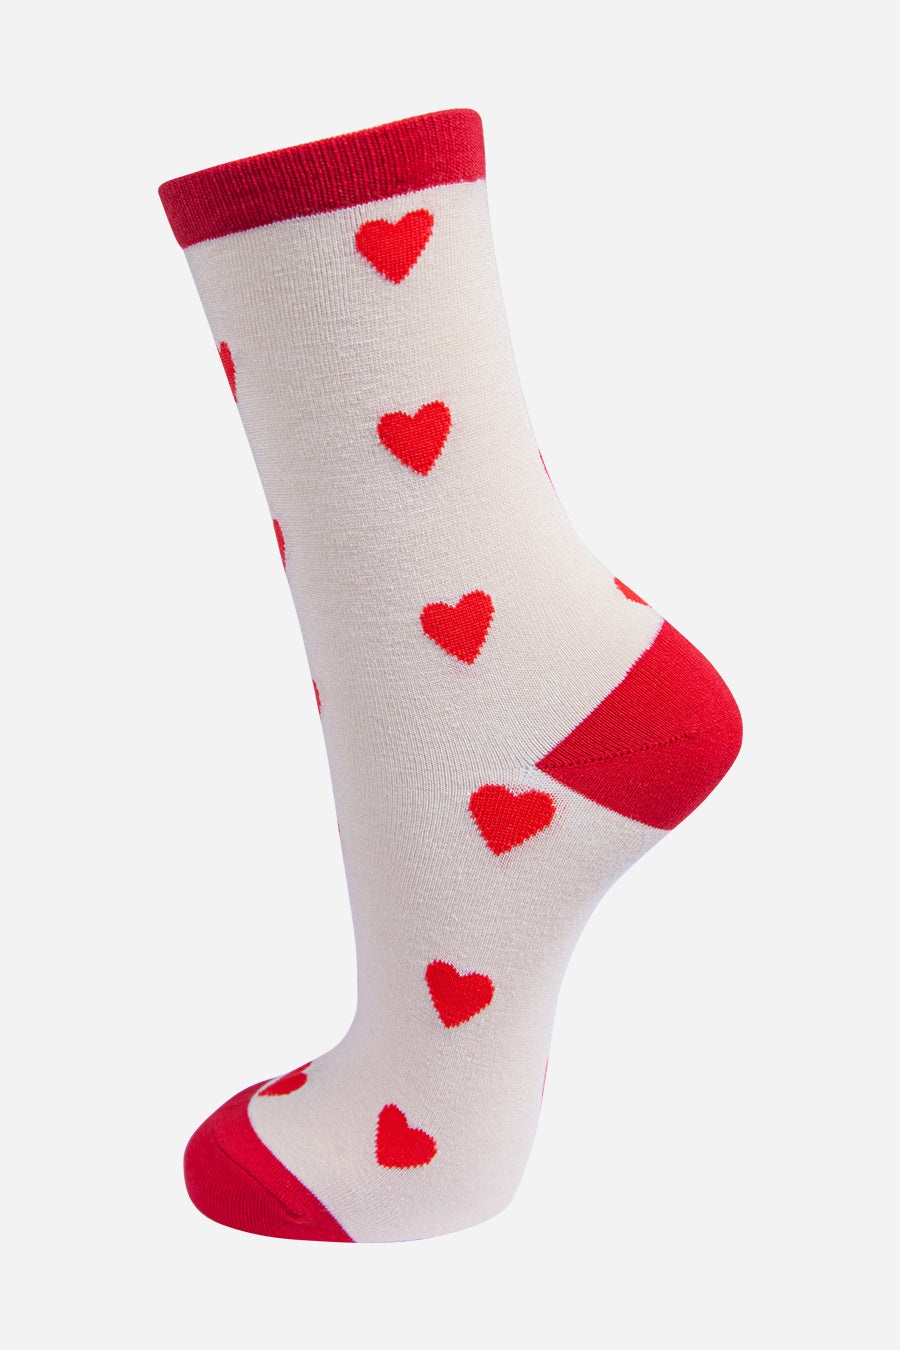 white bamboo socks with an all over red love heart pattern